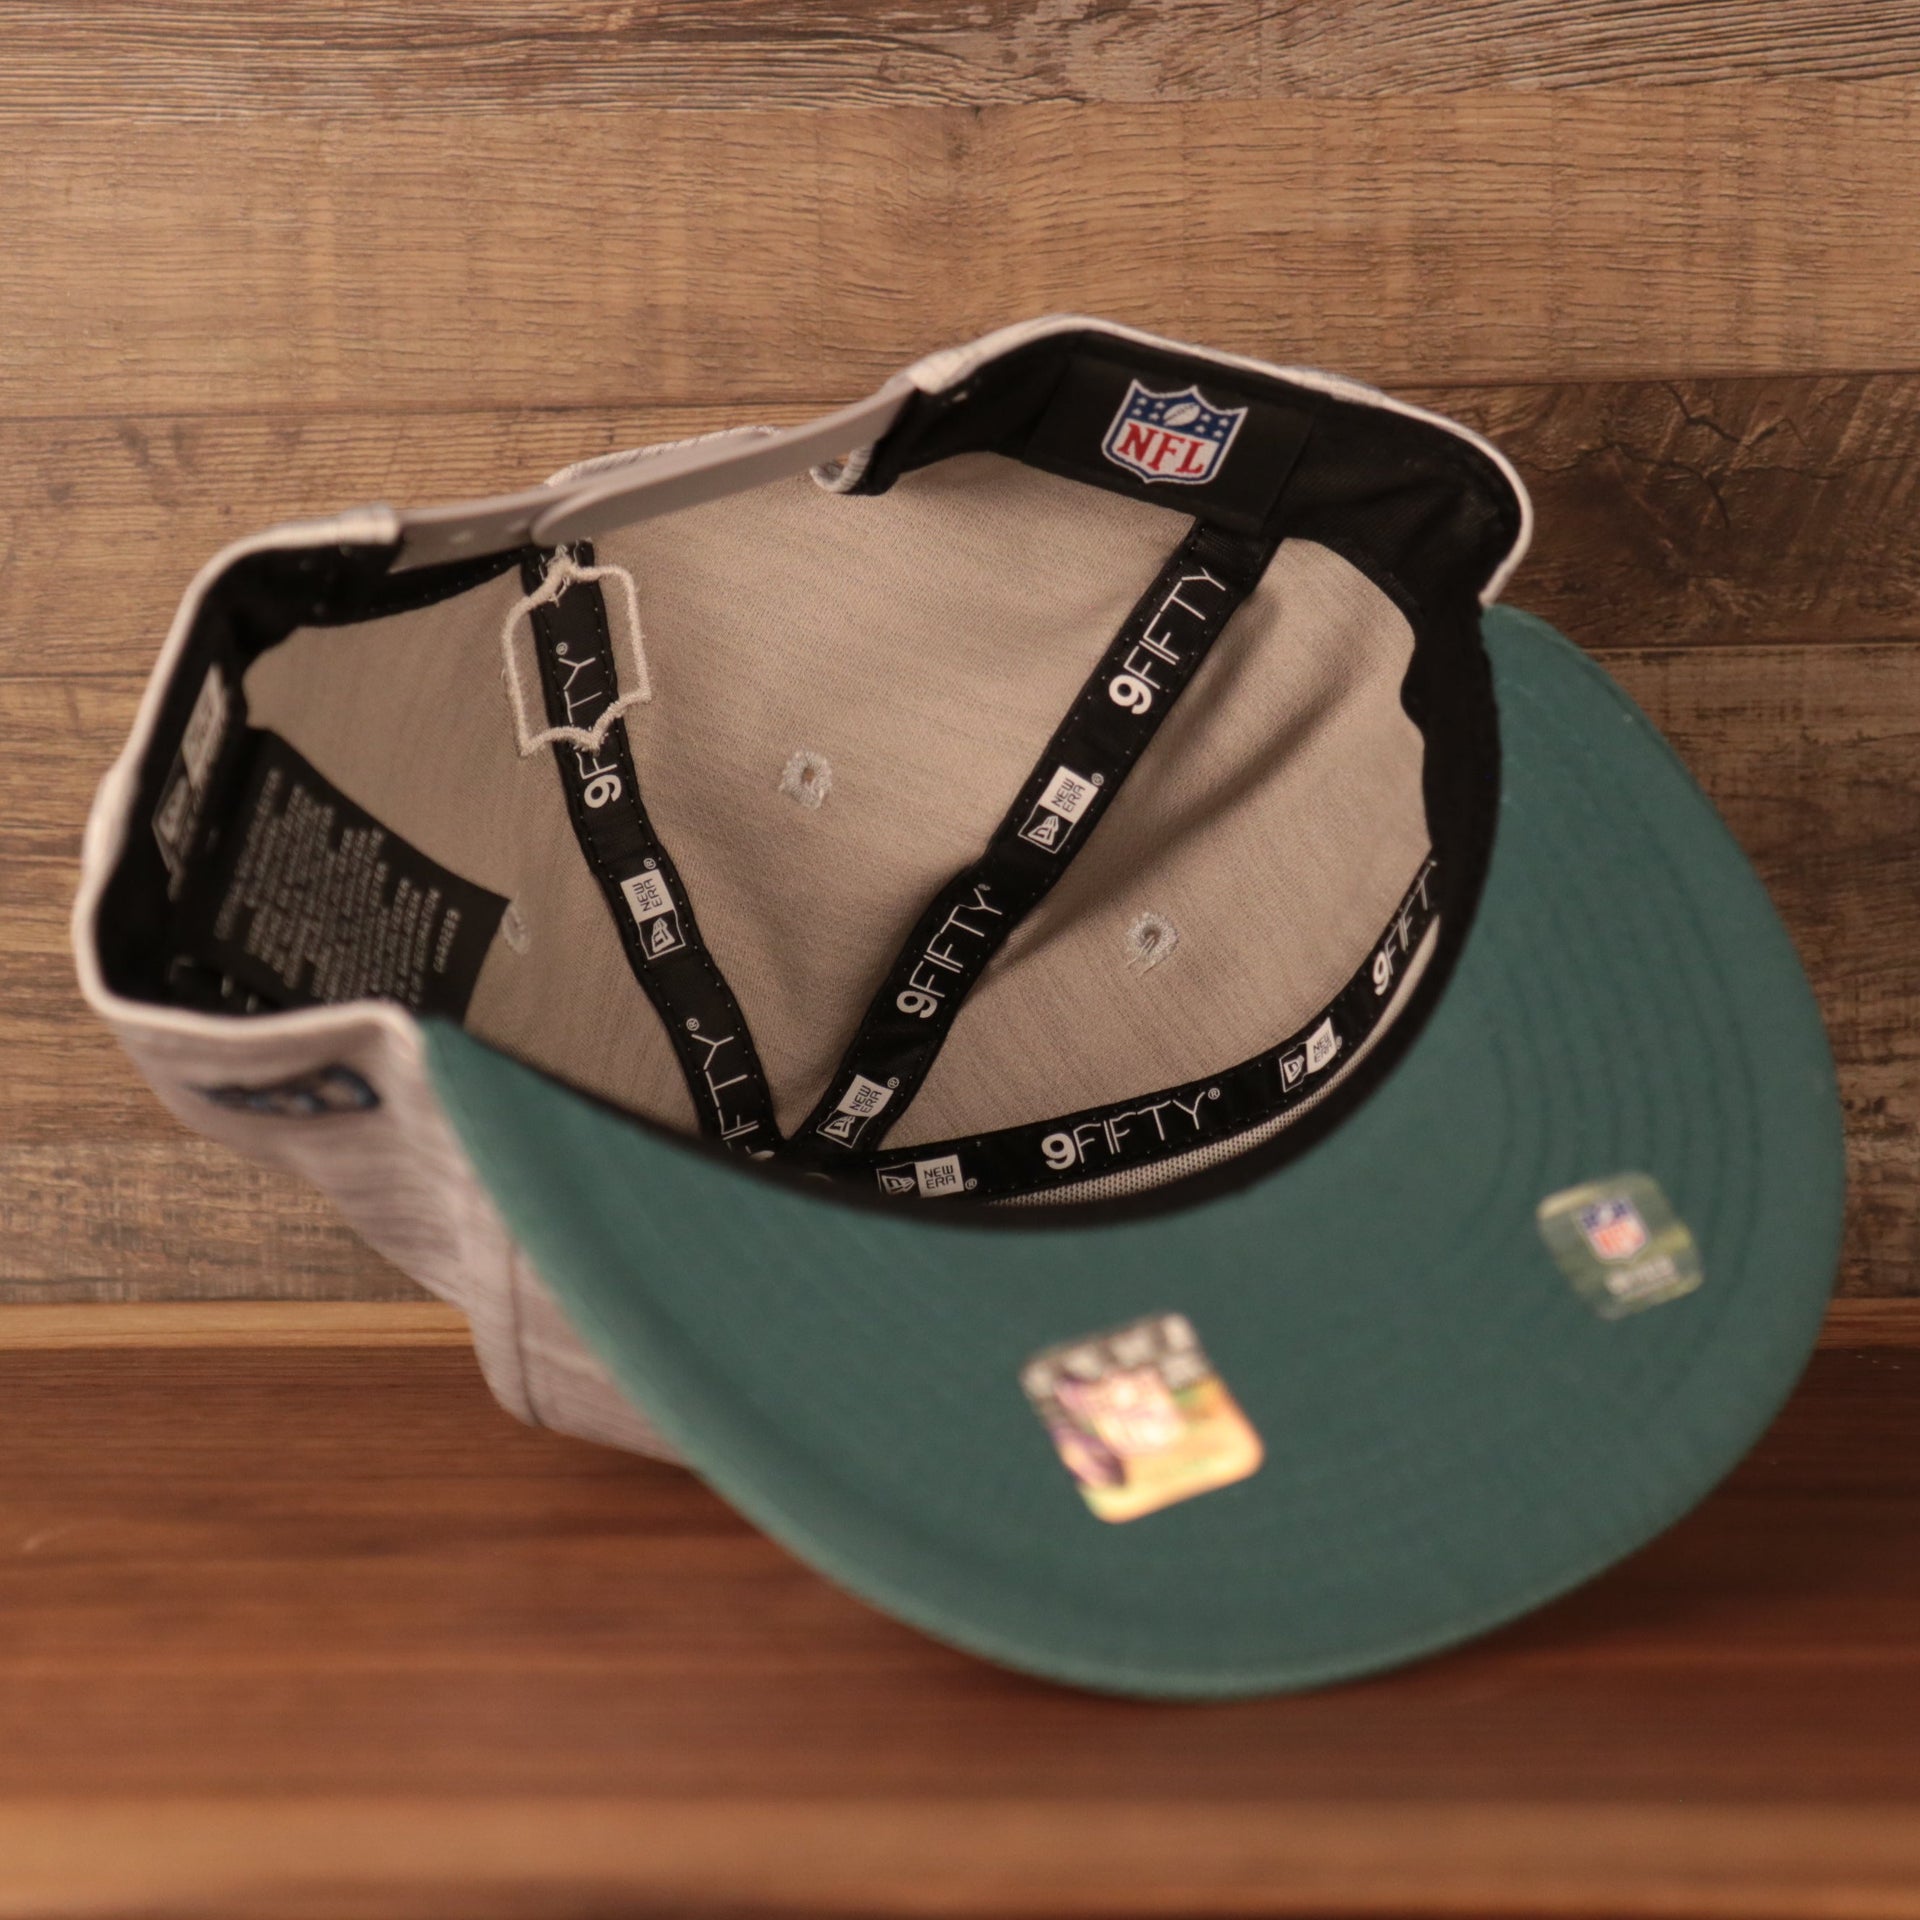 The NFL patch inside the 2021 nfl training snapback hat.